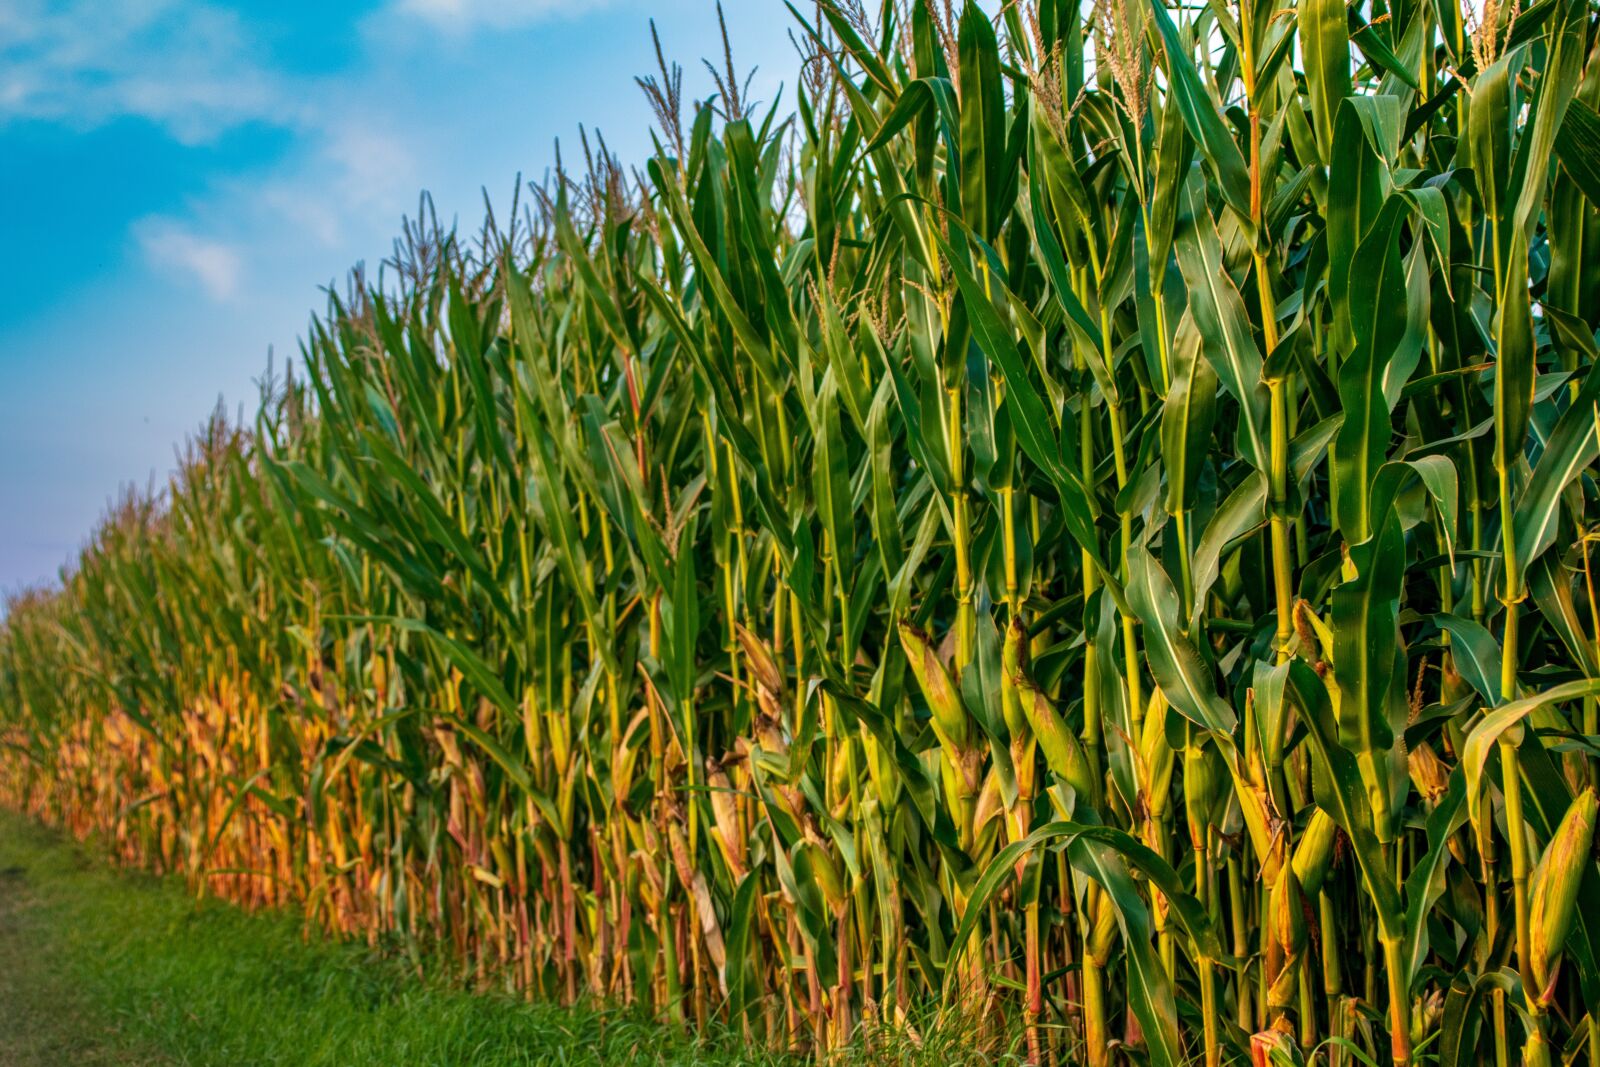 Tamron 18-200mm F3.5-6.3 Di II VC sample photo. Field, corn, agriculture photography